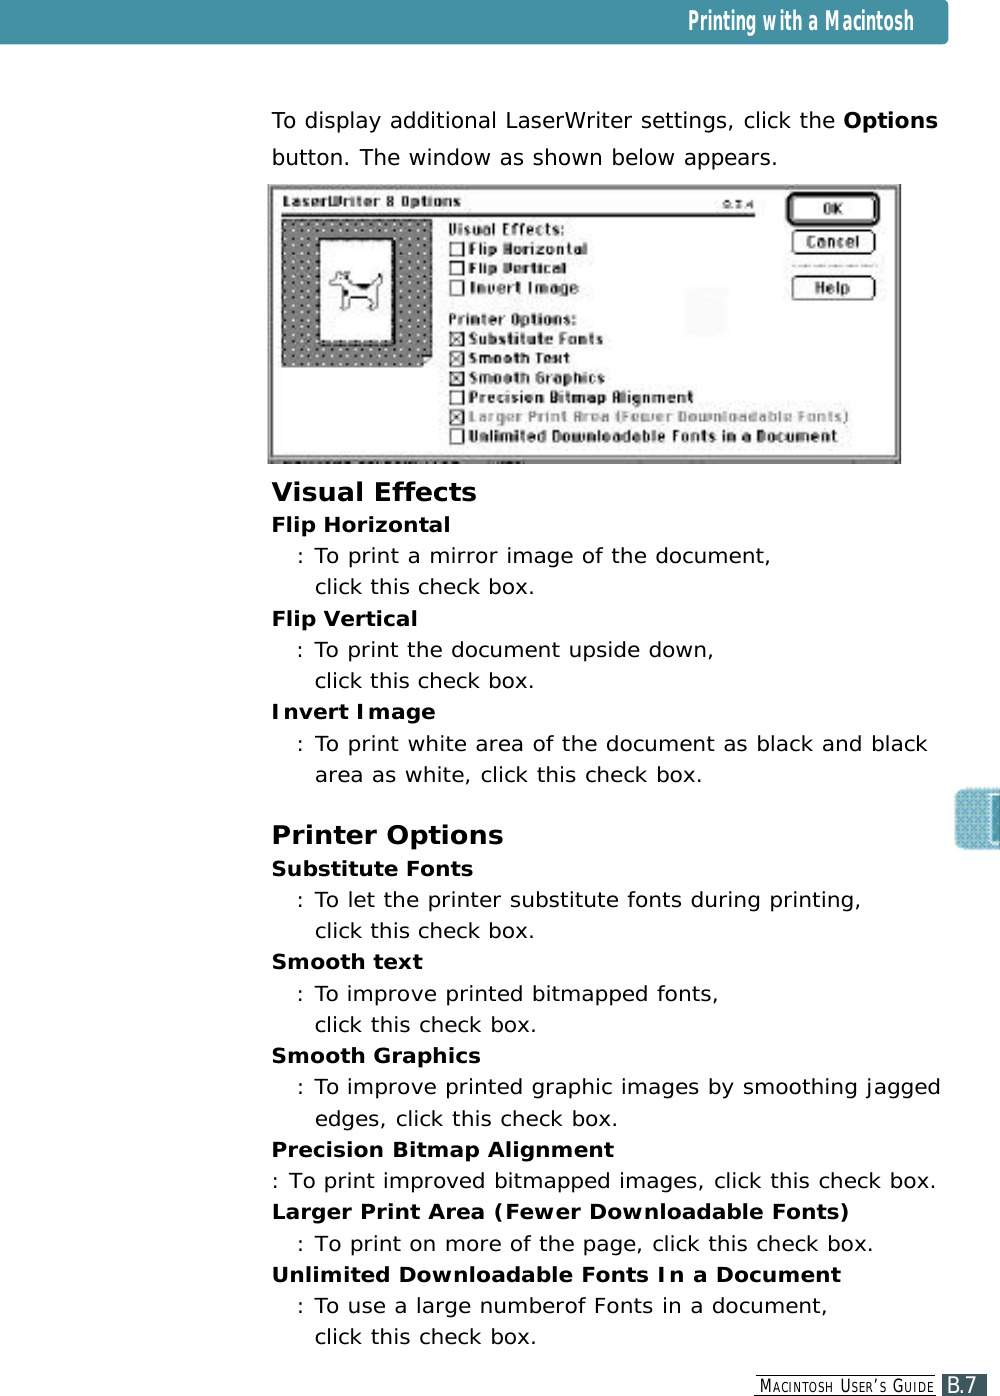 To display additional LaserWriter settings, click the Optionsbutton. The window as shown below appears.Visual EffectsFlip Horizontal: To print a mirror image of the document, click this check box.Flip Vertical: To print the document upside down, click this check box.Invert Image: To print white area of the document as black and blackarea as white, click this check box.Printer OptionsSubstitute Fonts : To let the printer substitute fonts during printing, click this check box.Smooth text : To improve printed bitmapped fonts, click this check box.Smooth Graphics : To improve printed graphic images by smoothing jaggededges, click this check box.Precision Bitmap Alignment : To print improved bitmapped images, click this check box.Larger Print Area (Fewer Downloadable Fonts) : To print on more of the page, click this check box.Unlimited Downloadable Fonts In a Document : To use a large numberof Fonts in a document,  click this check box.Printing with a MacintoshB.7MA C I N T O S H US E R ’SGU I D E